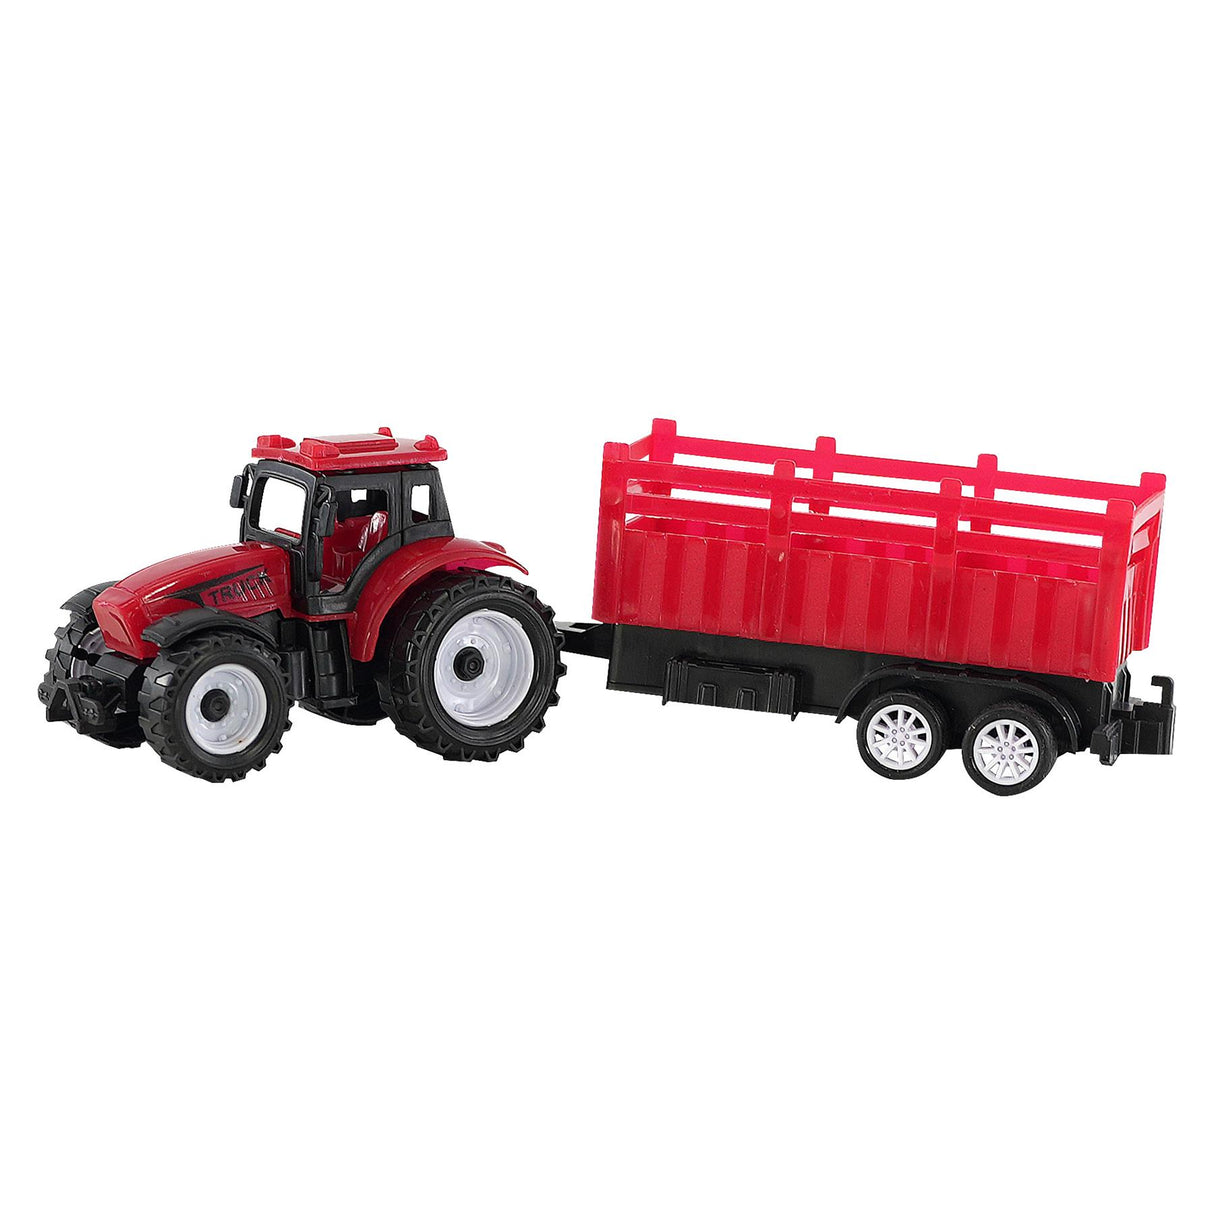 Farm Tractor and Trailer Playset by The Magic Toy Shop - UKBuyZone